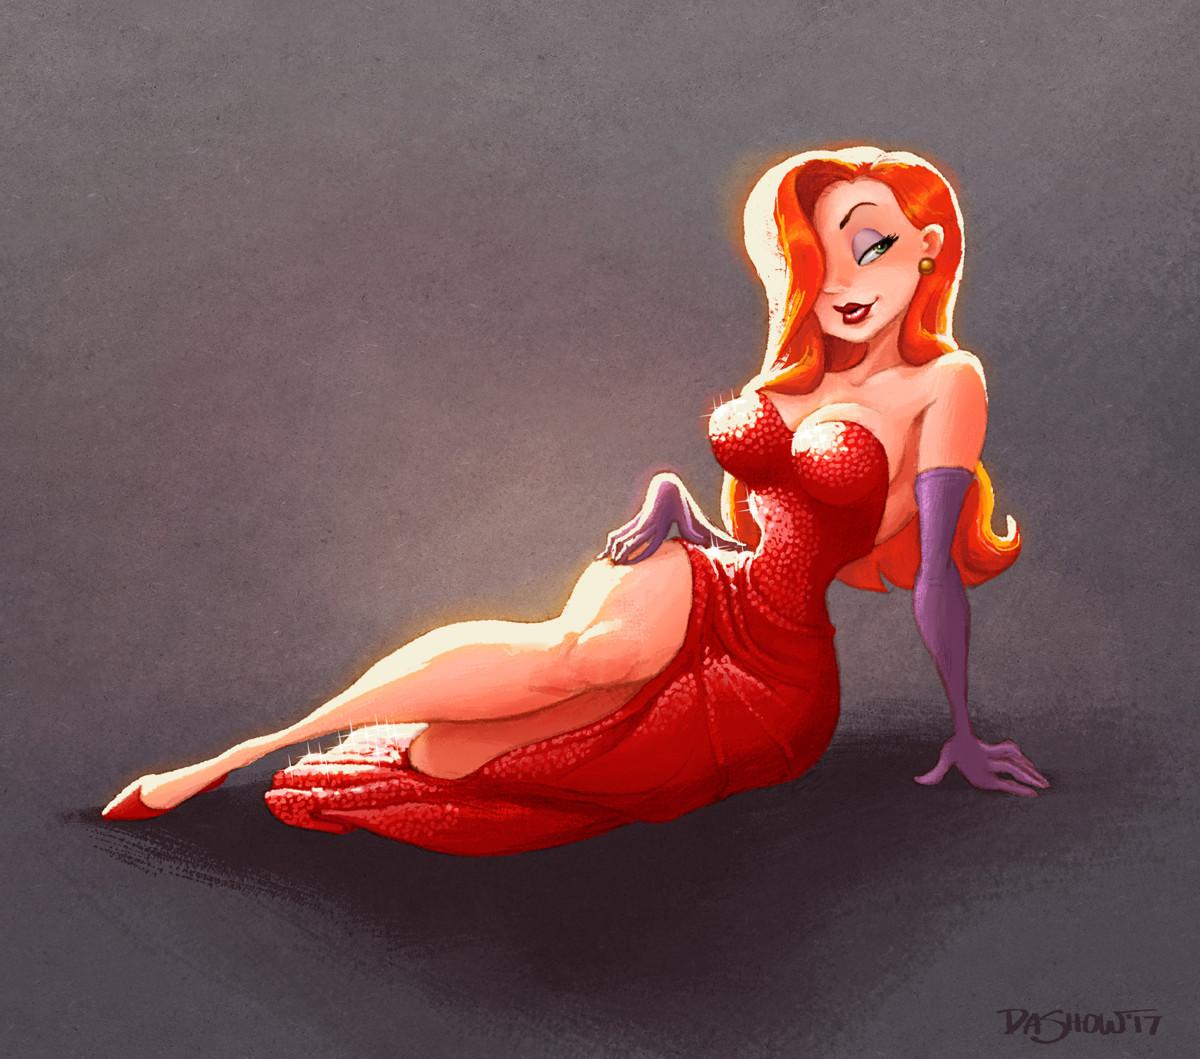 50+ Hot Pictures Of Jessica Rabbit – The Hottest Cartoon Character Of All Time | Best Of Comic Books